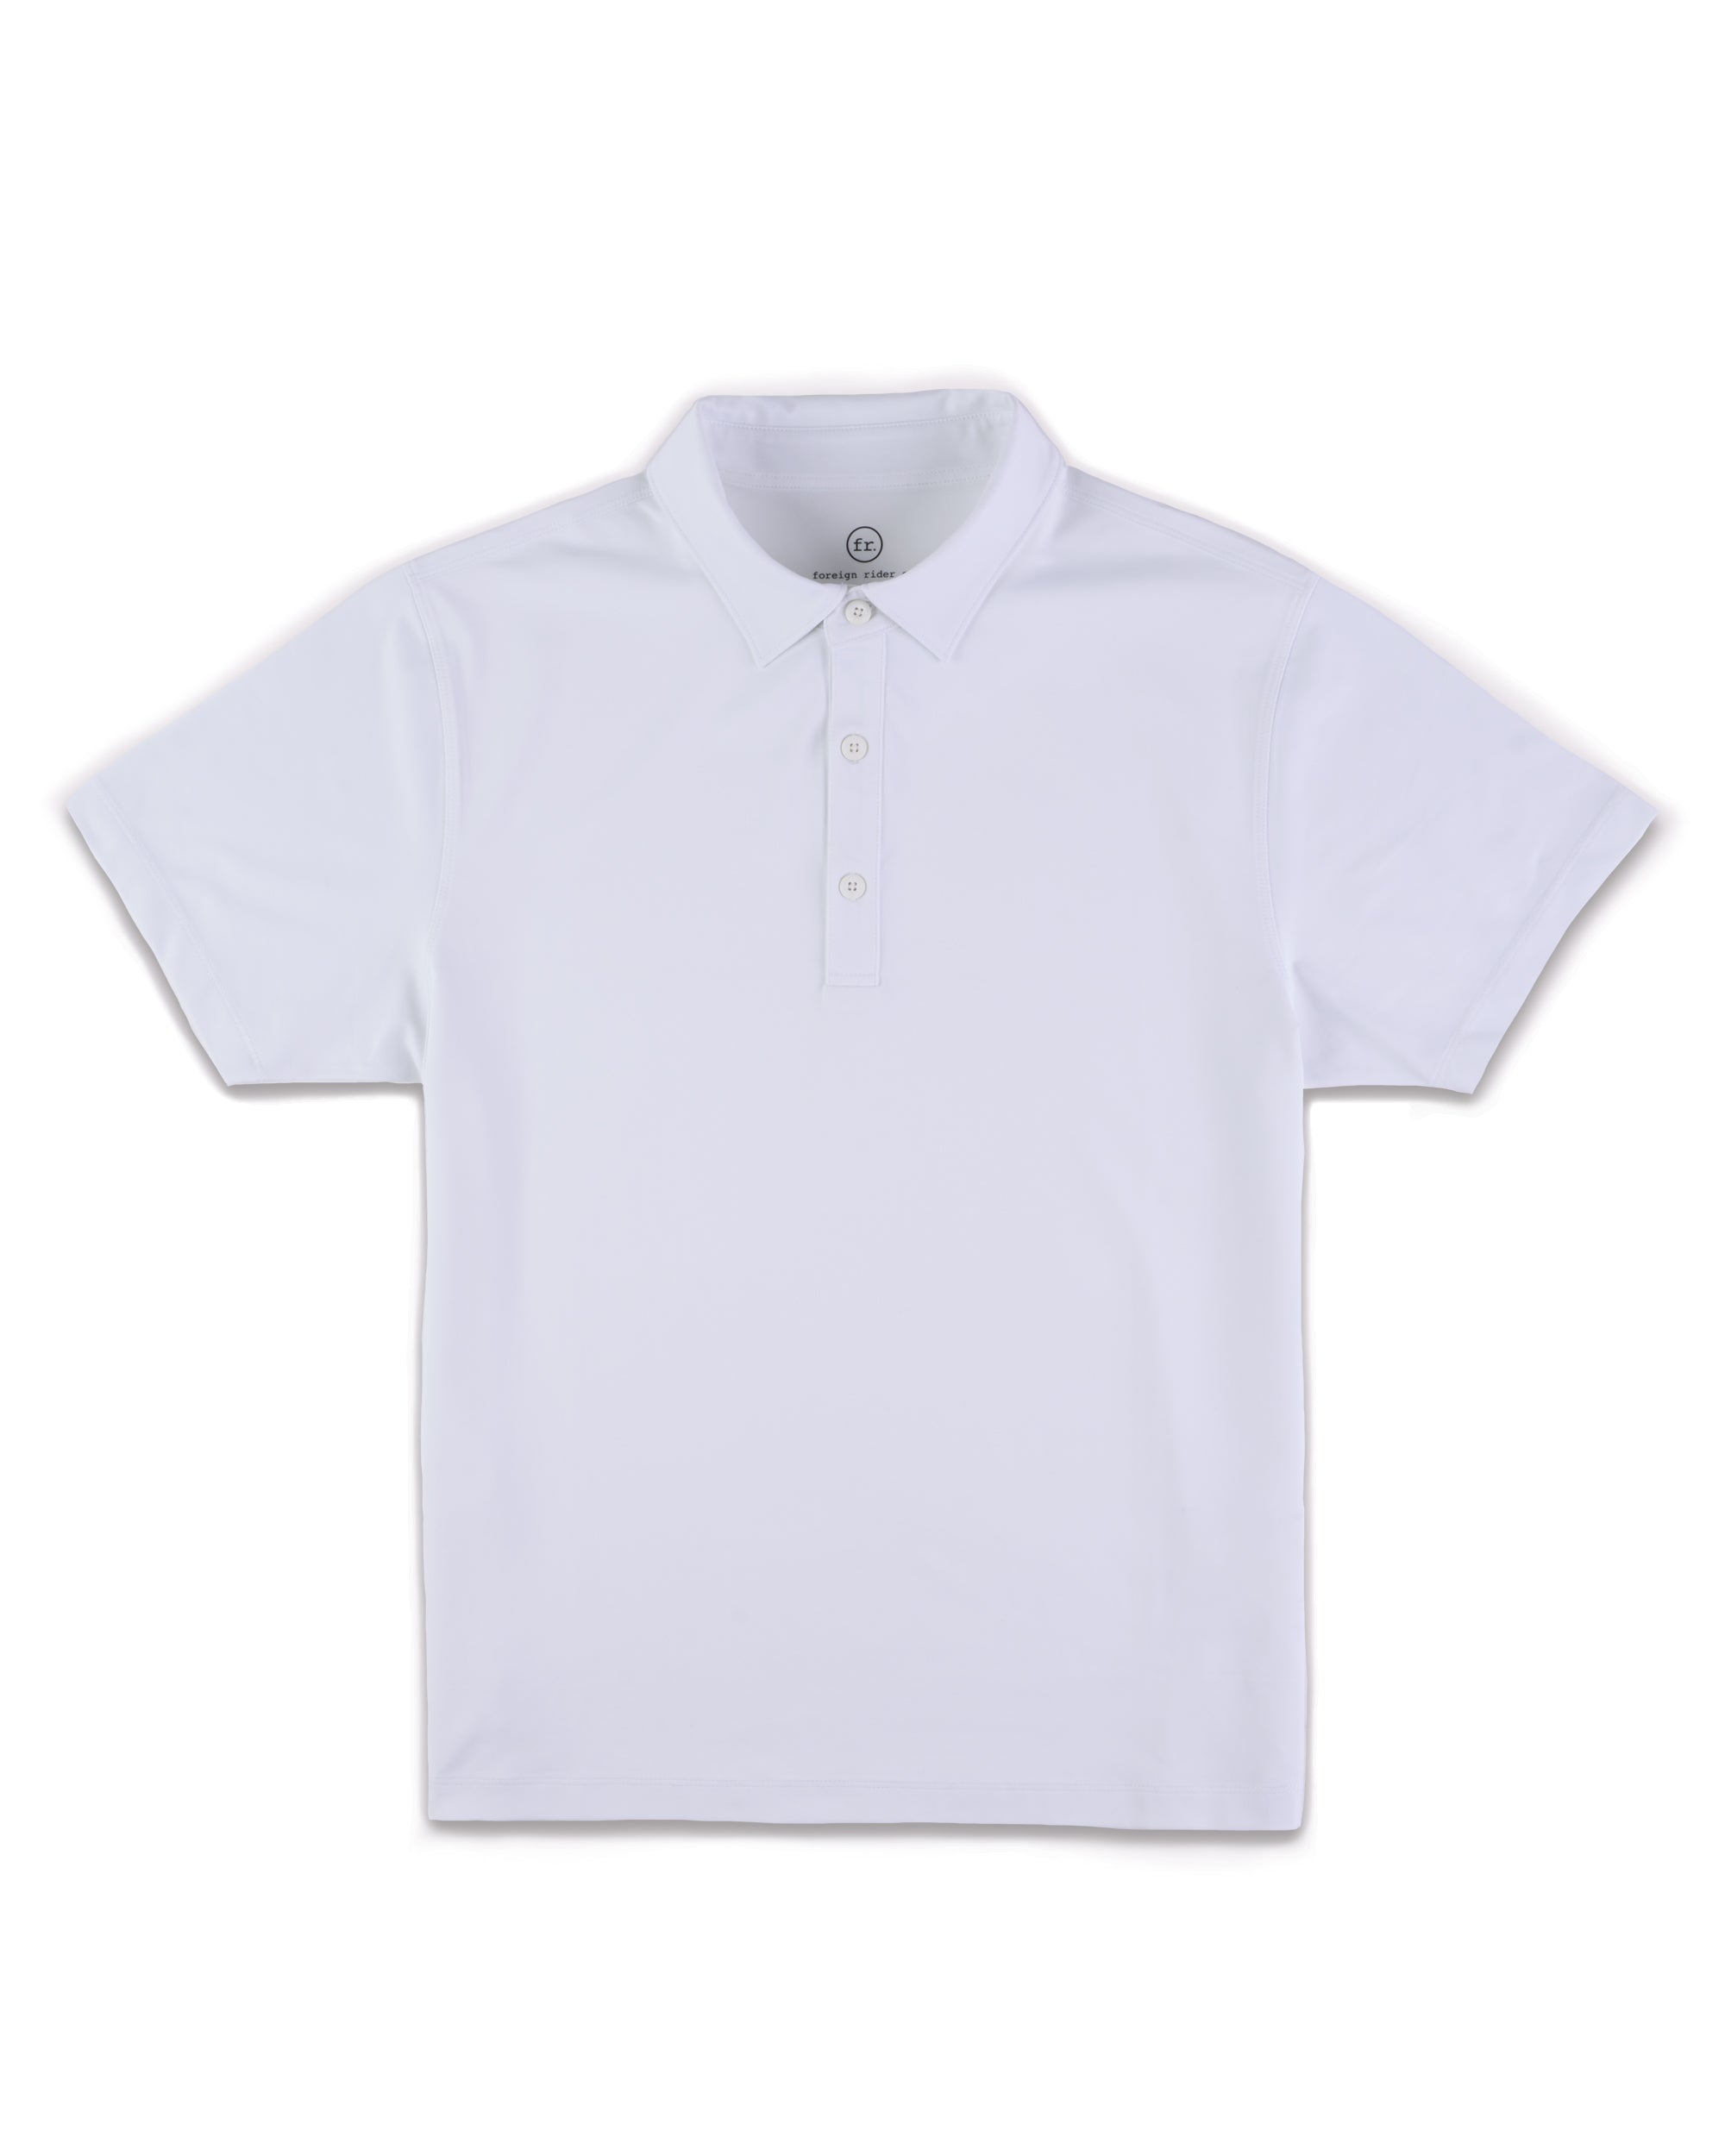 Performance Polo White - Foreign Rider Co.